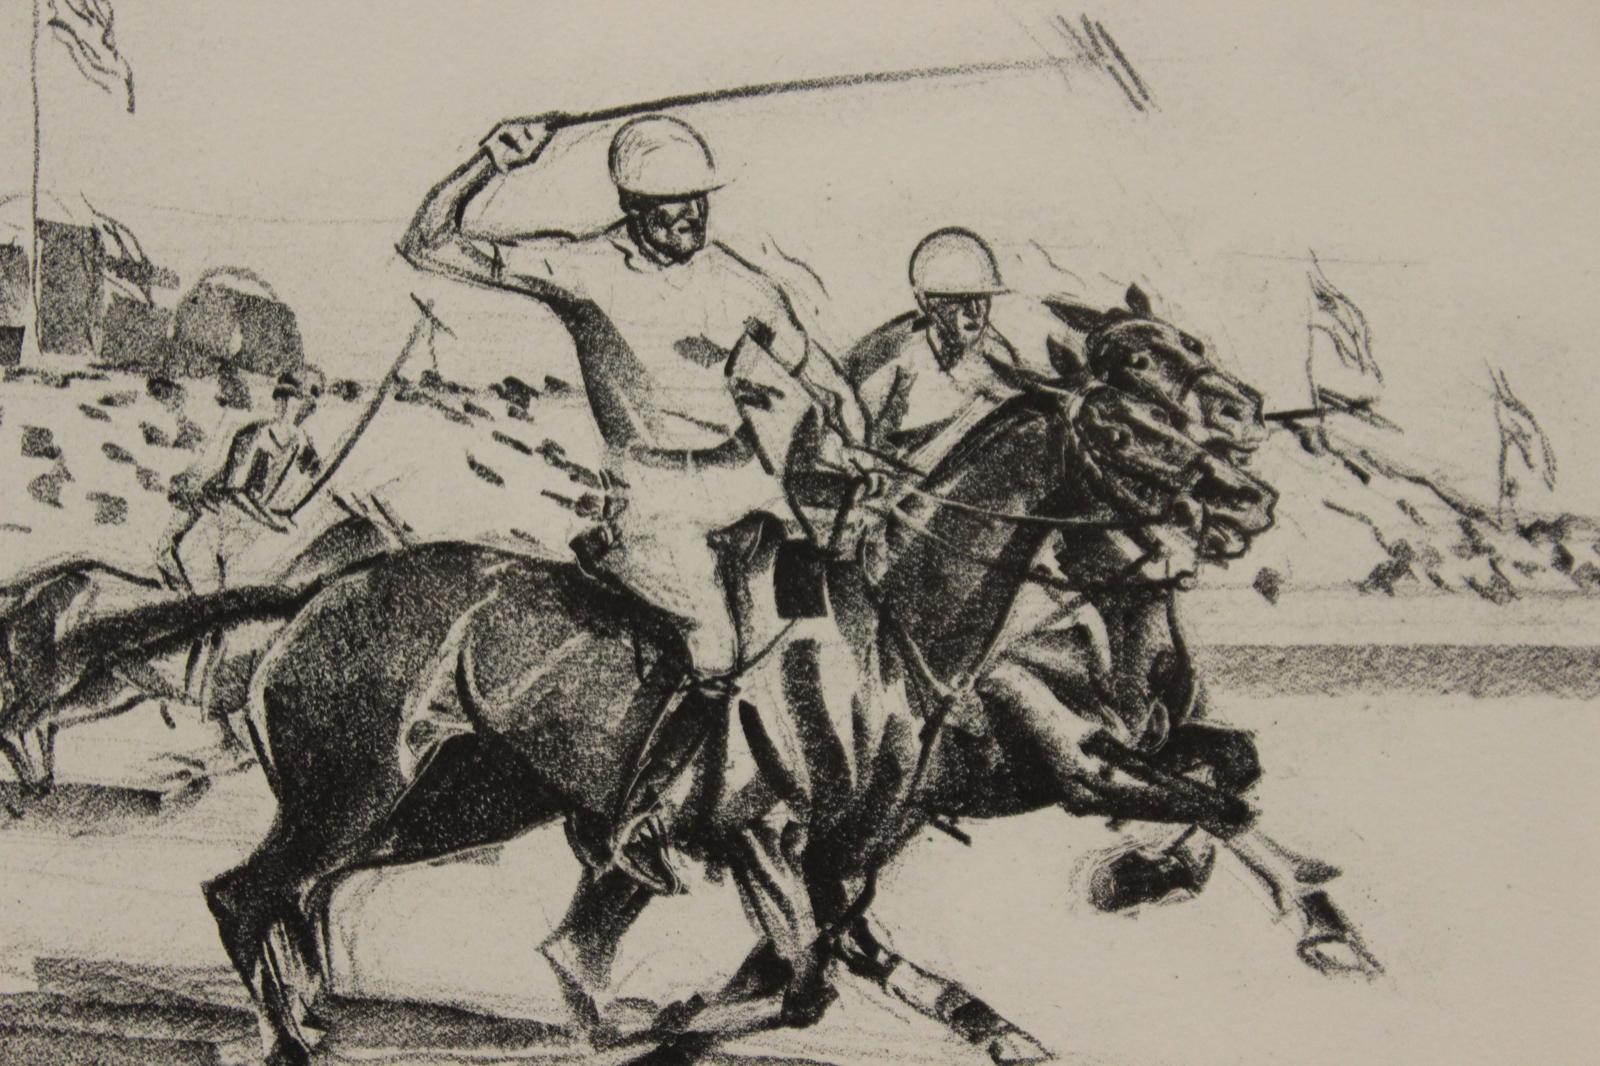 Classic charcoal polo drawing depicting 4 players on the field

Art Sz: 8 1/4